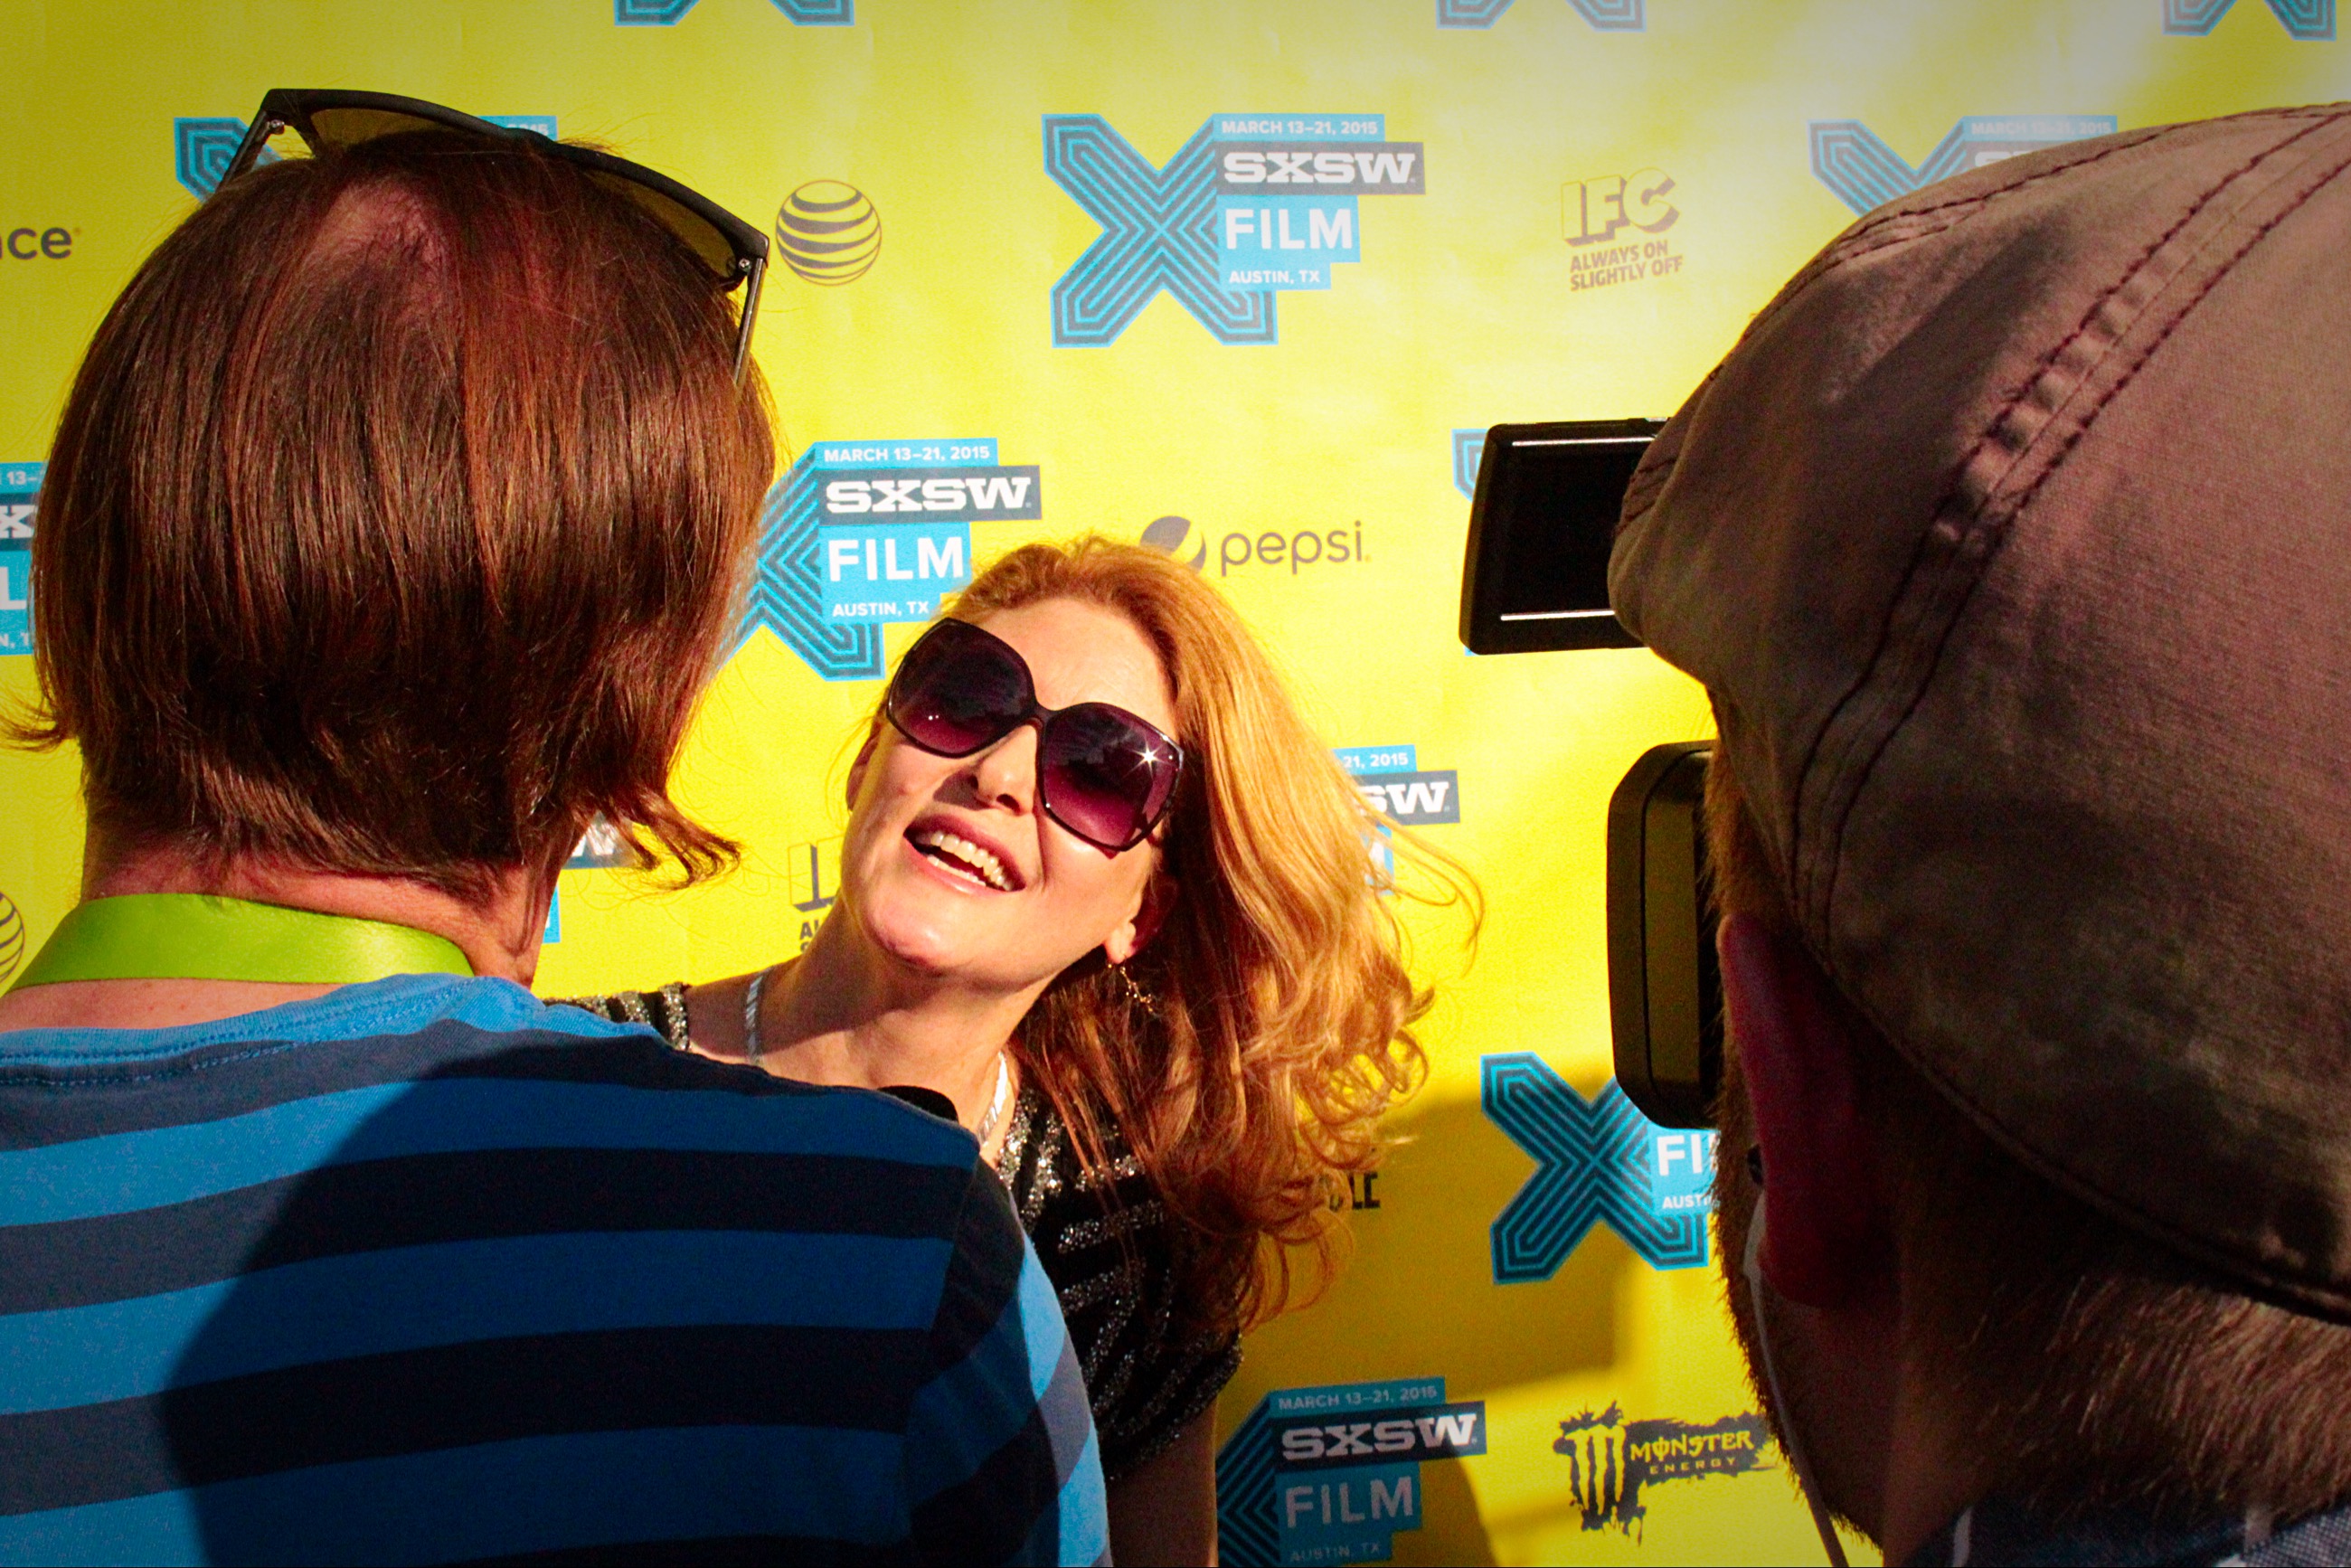 Ondi Timoner on the red carpet for here SXSW premiere of her film BRAND: A Second Coming